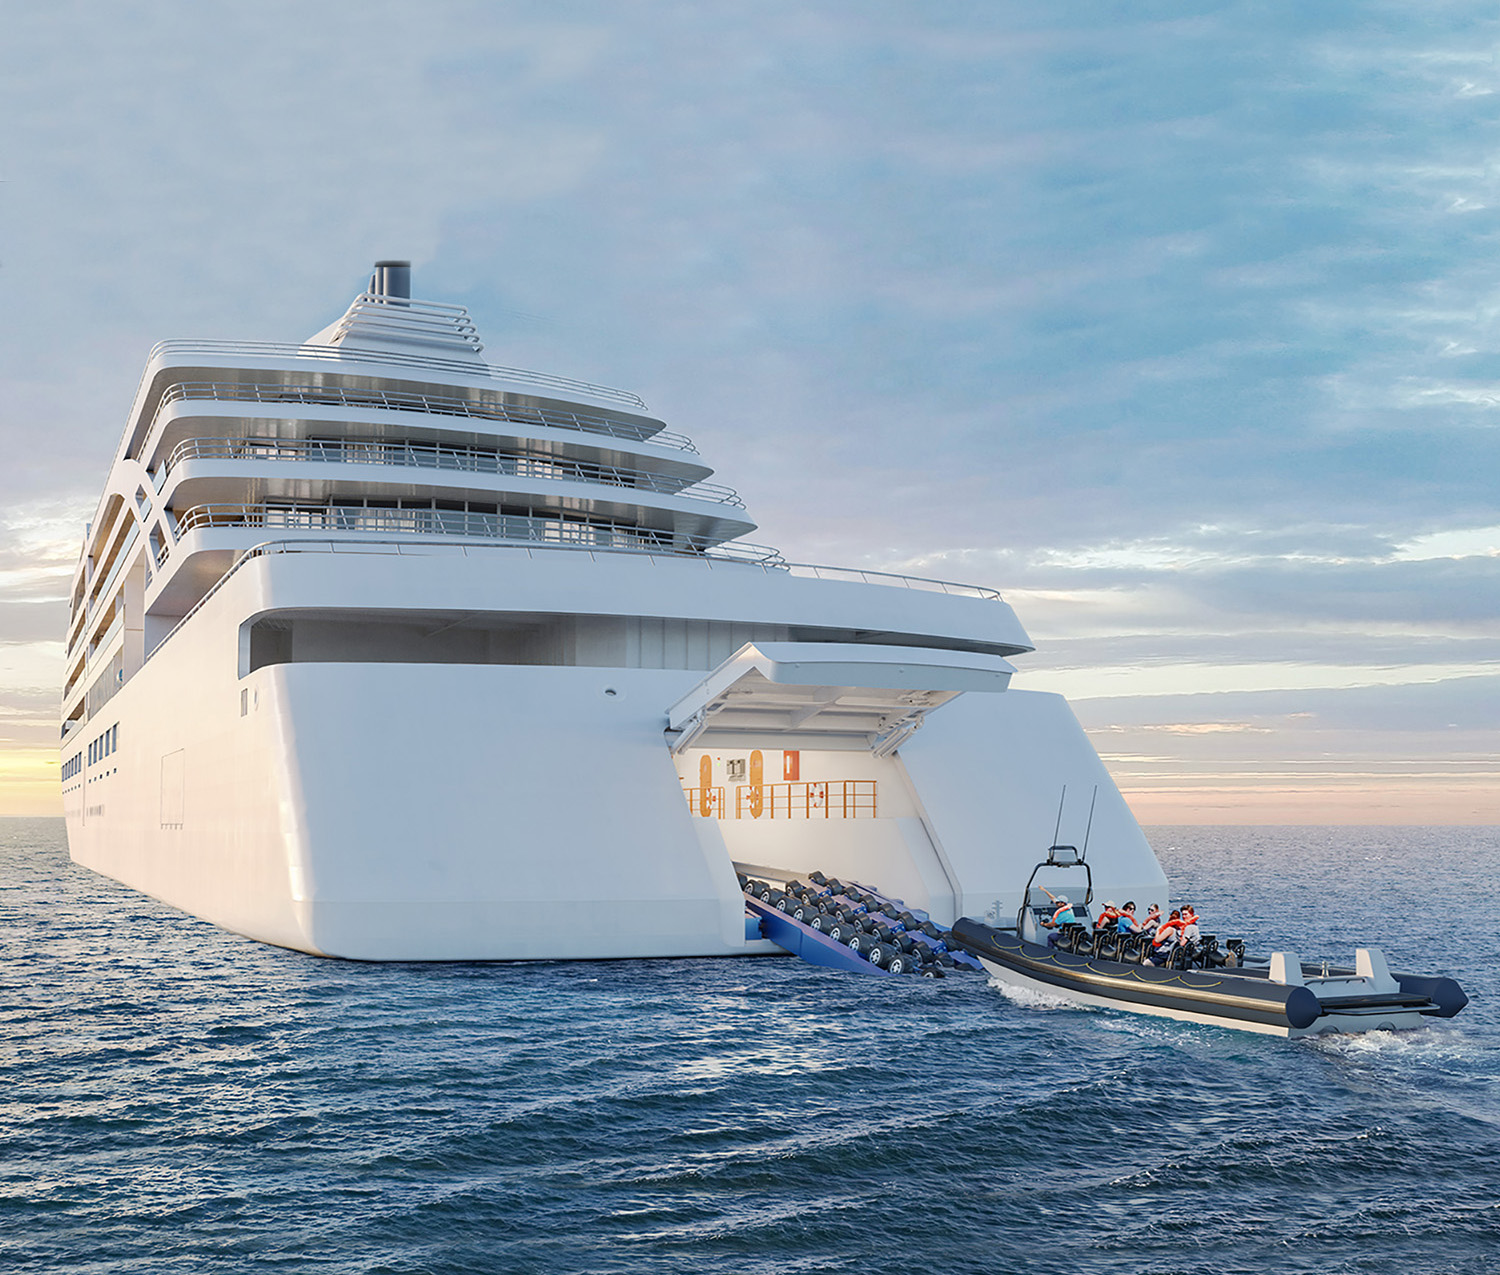 As this rendering shows, Viking's new ship, Viking Octantis, will be equipped with sensors and small boats for surveying and sampling. Because it will sail the same route around the Great Lakes, waters along its path can be monitored long-term.